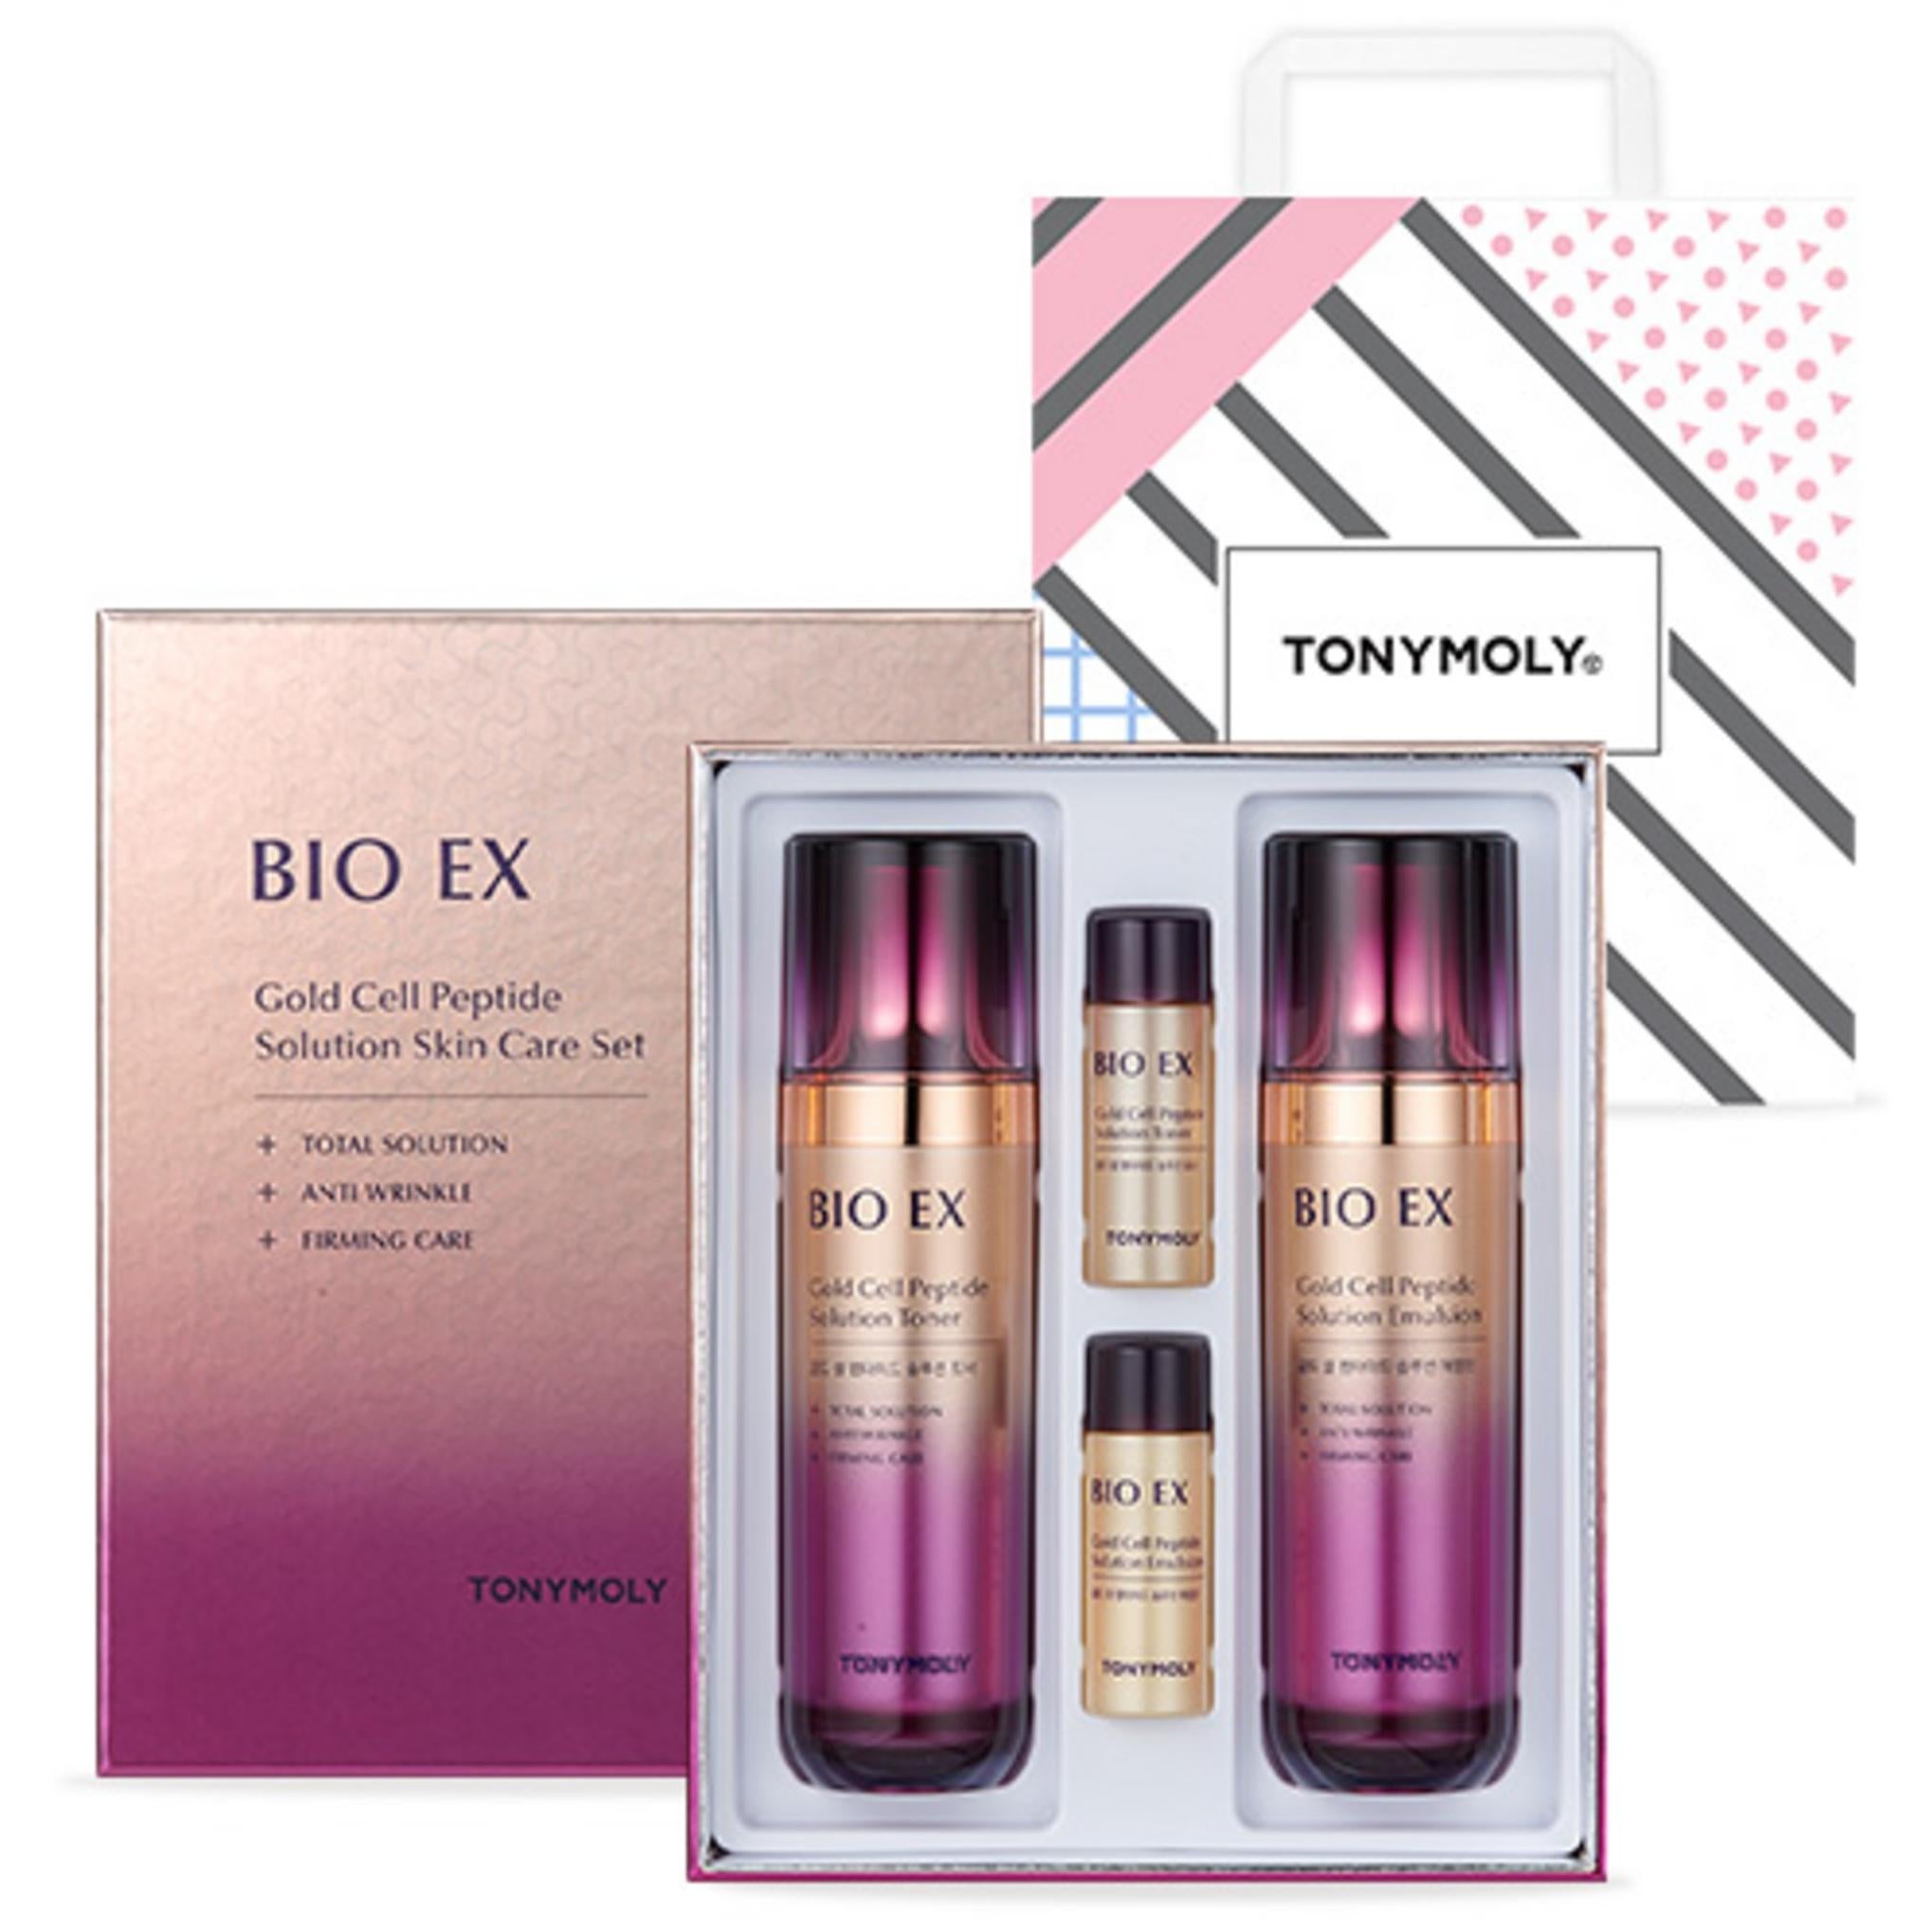 TONY MOLY BioEX Gold Cell Peptide Solution Basic Cosmetic Set of 2